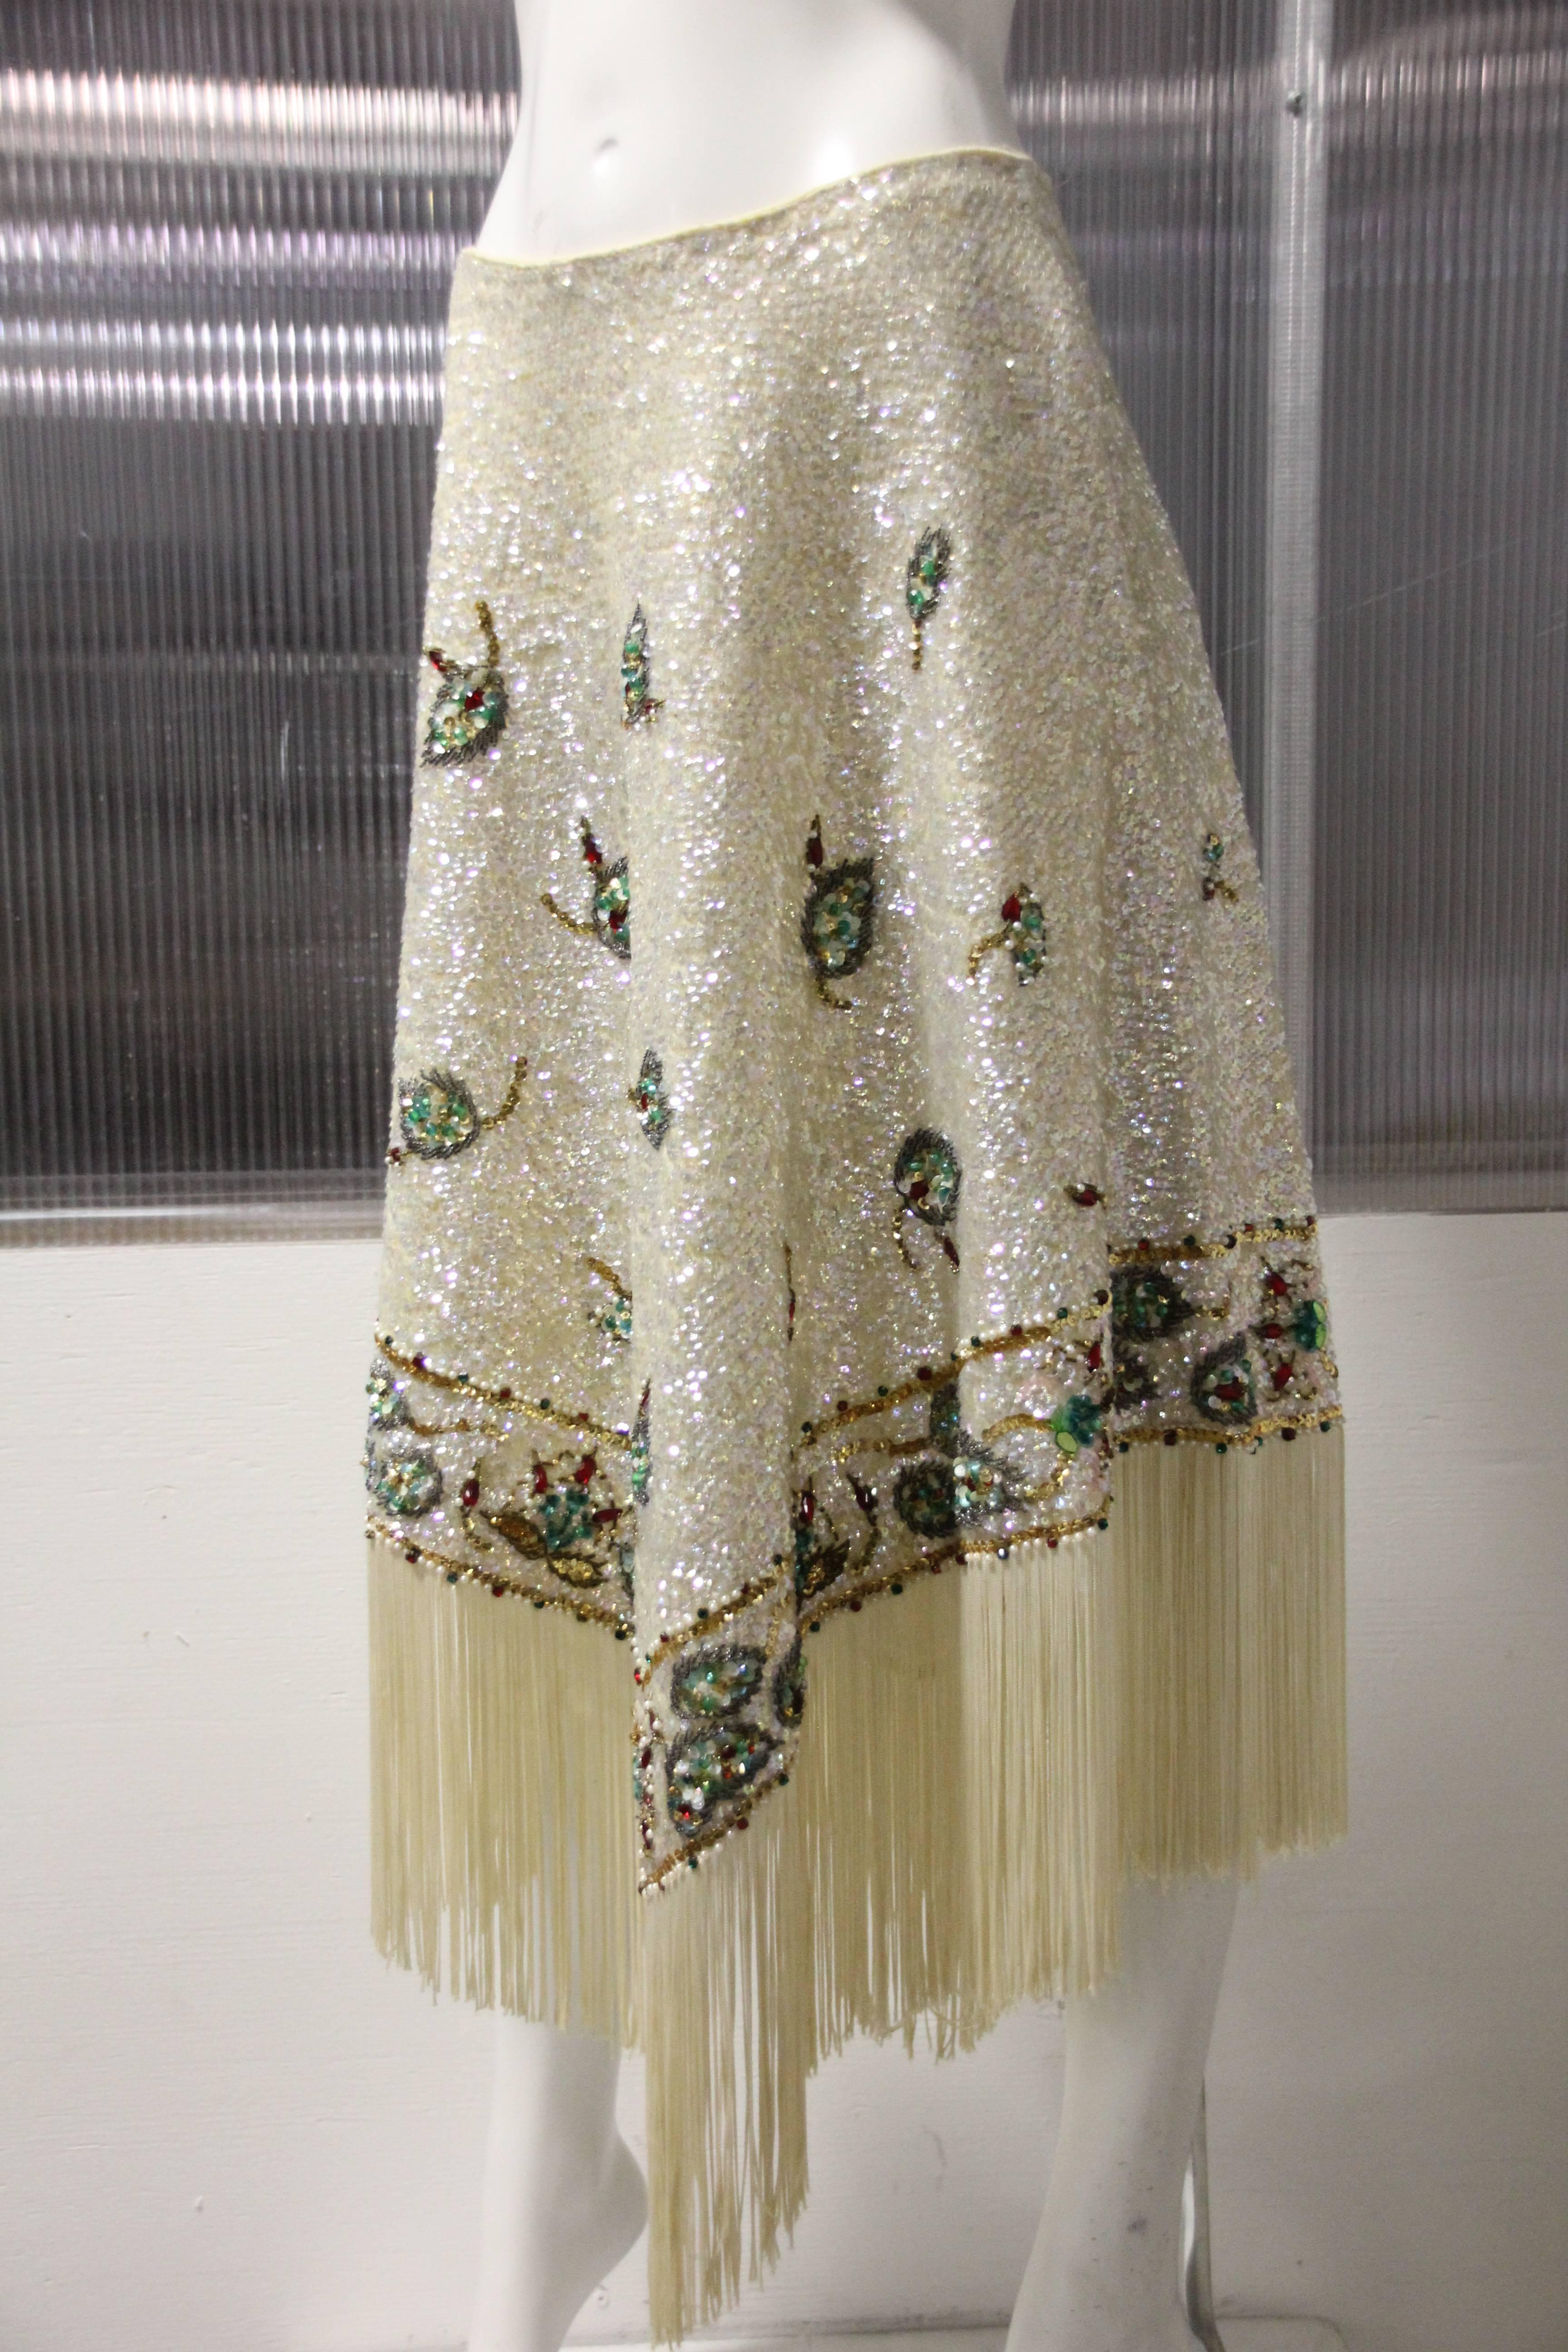 1960's Valentina Ltd. of Honk Kong soft cream wool knit beaded and sequin skirt is pointed at hem and trimmed with 8 inch cream rayon fringe.
Entire skirt is of iridescent sequins and multi colored beads and red glass stones creating a floral leaf